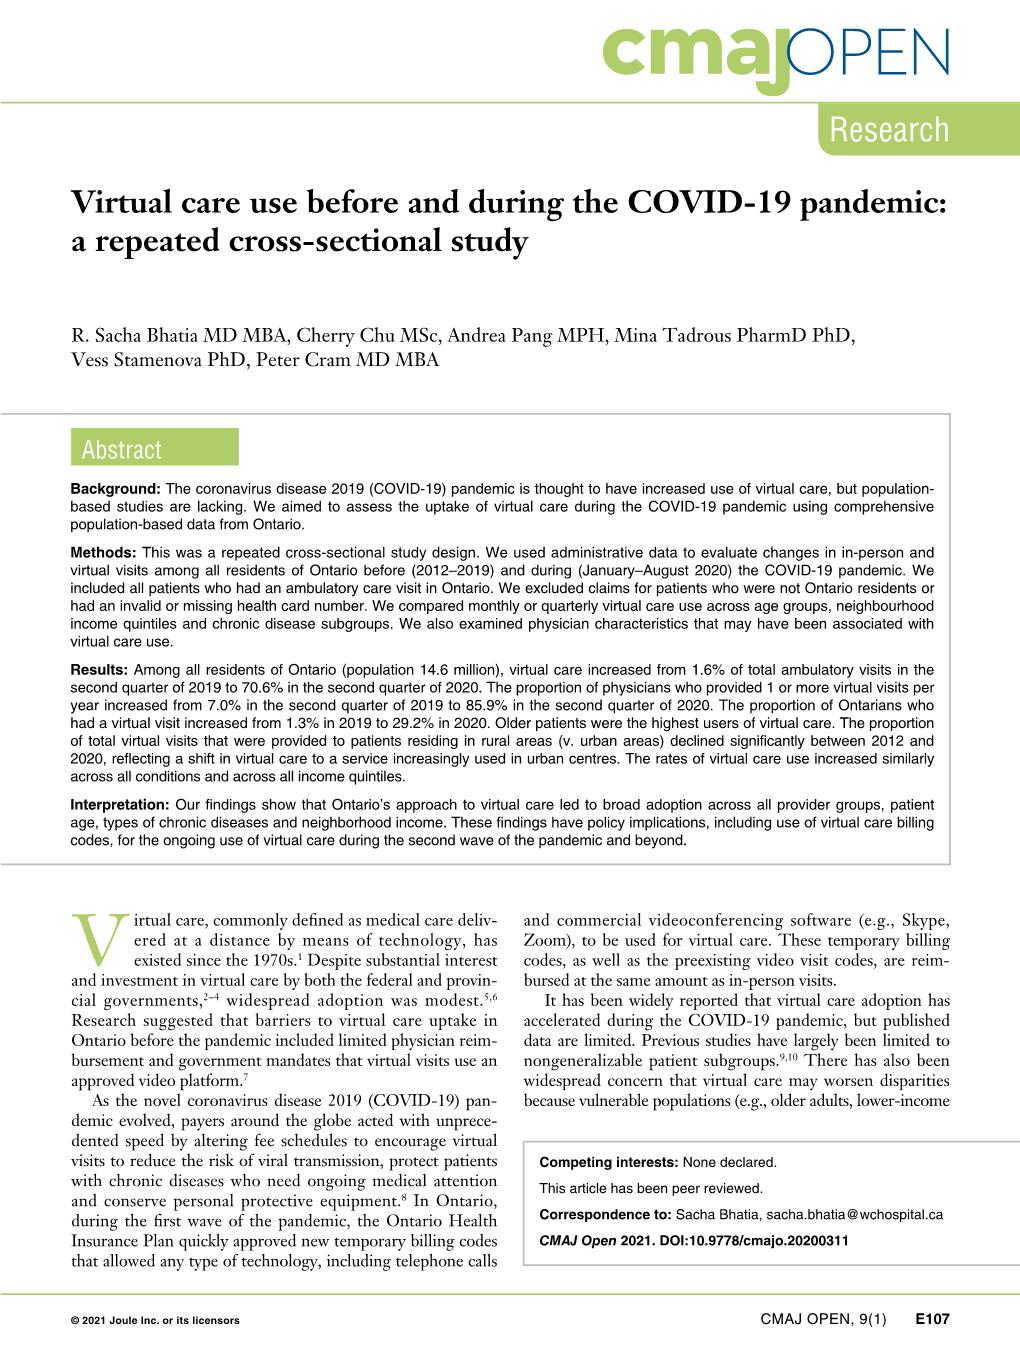 Virtual Care Use Before and During the COVID-19 Pandemic: a Repeated Cross-Sectional Study